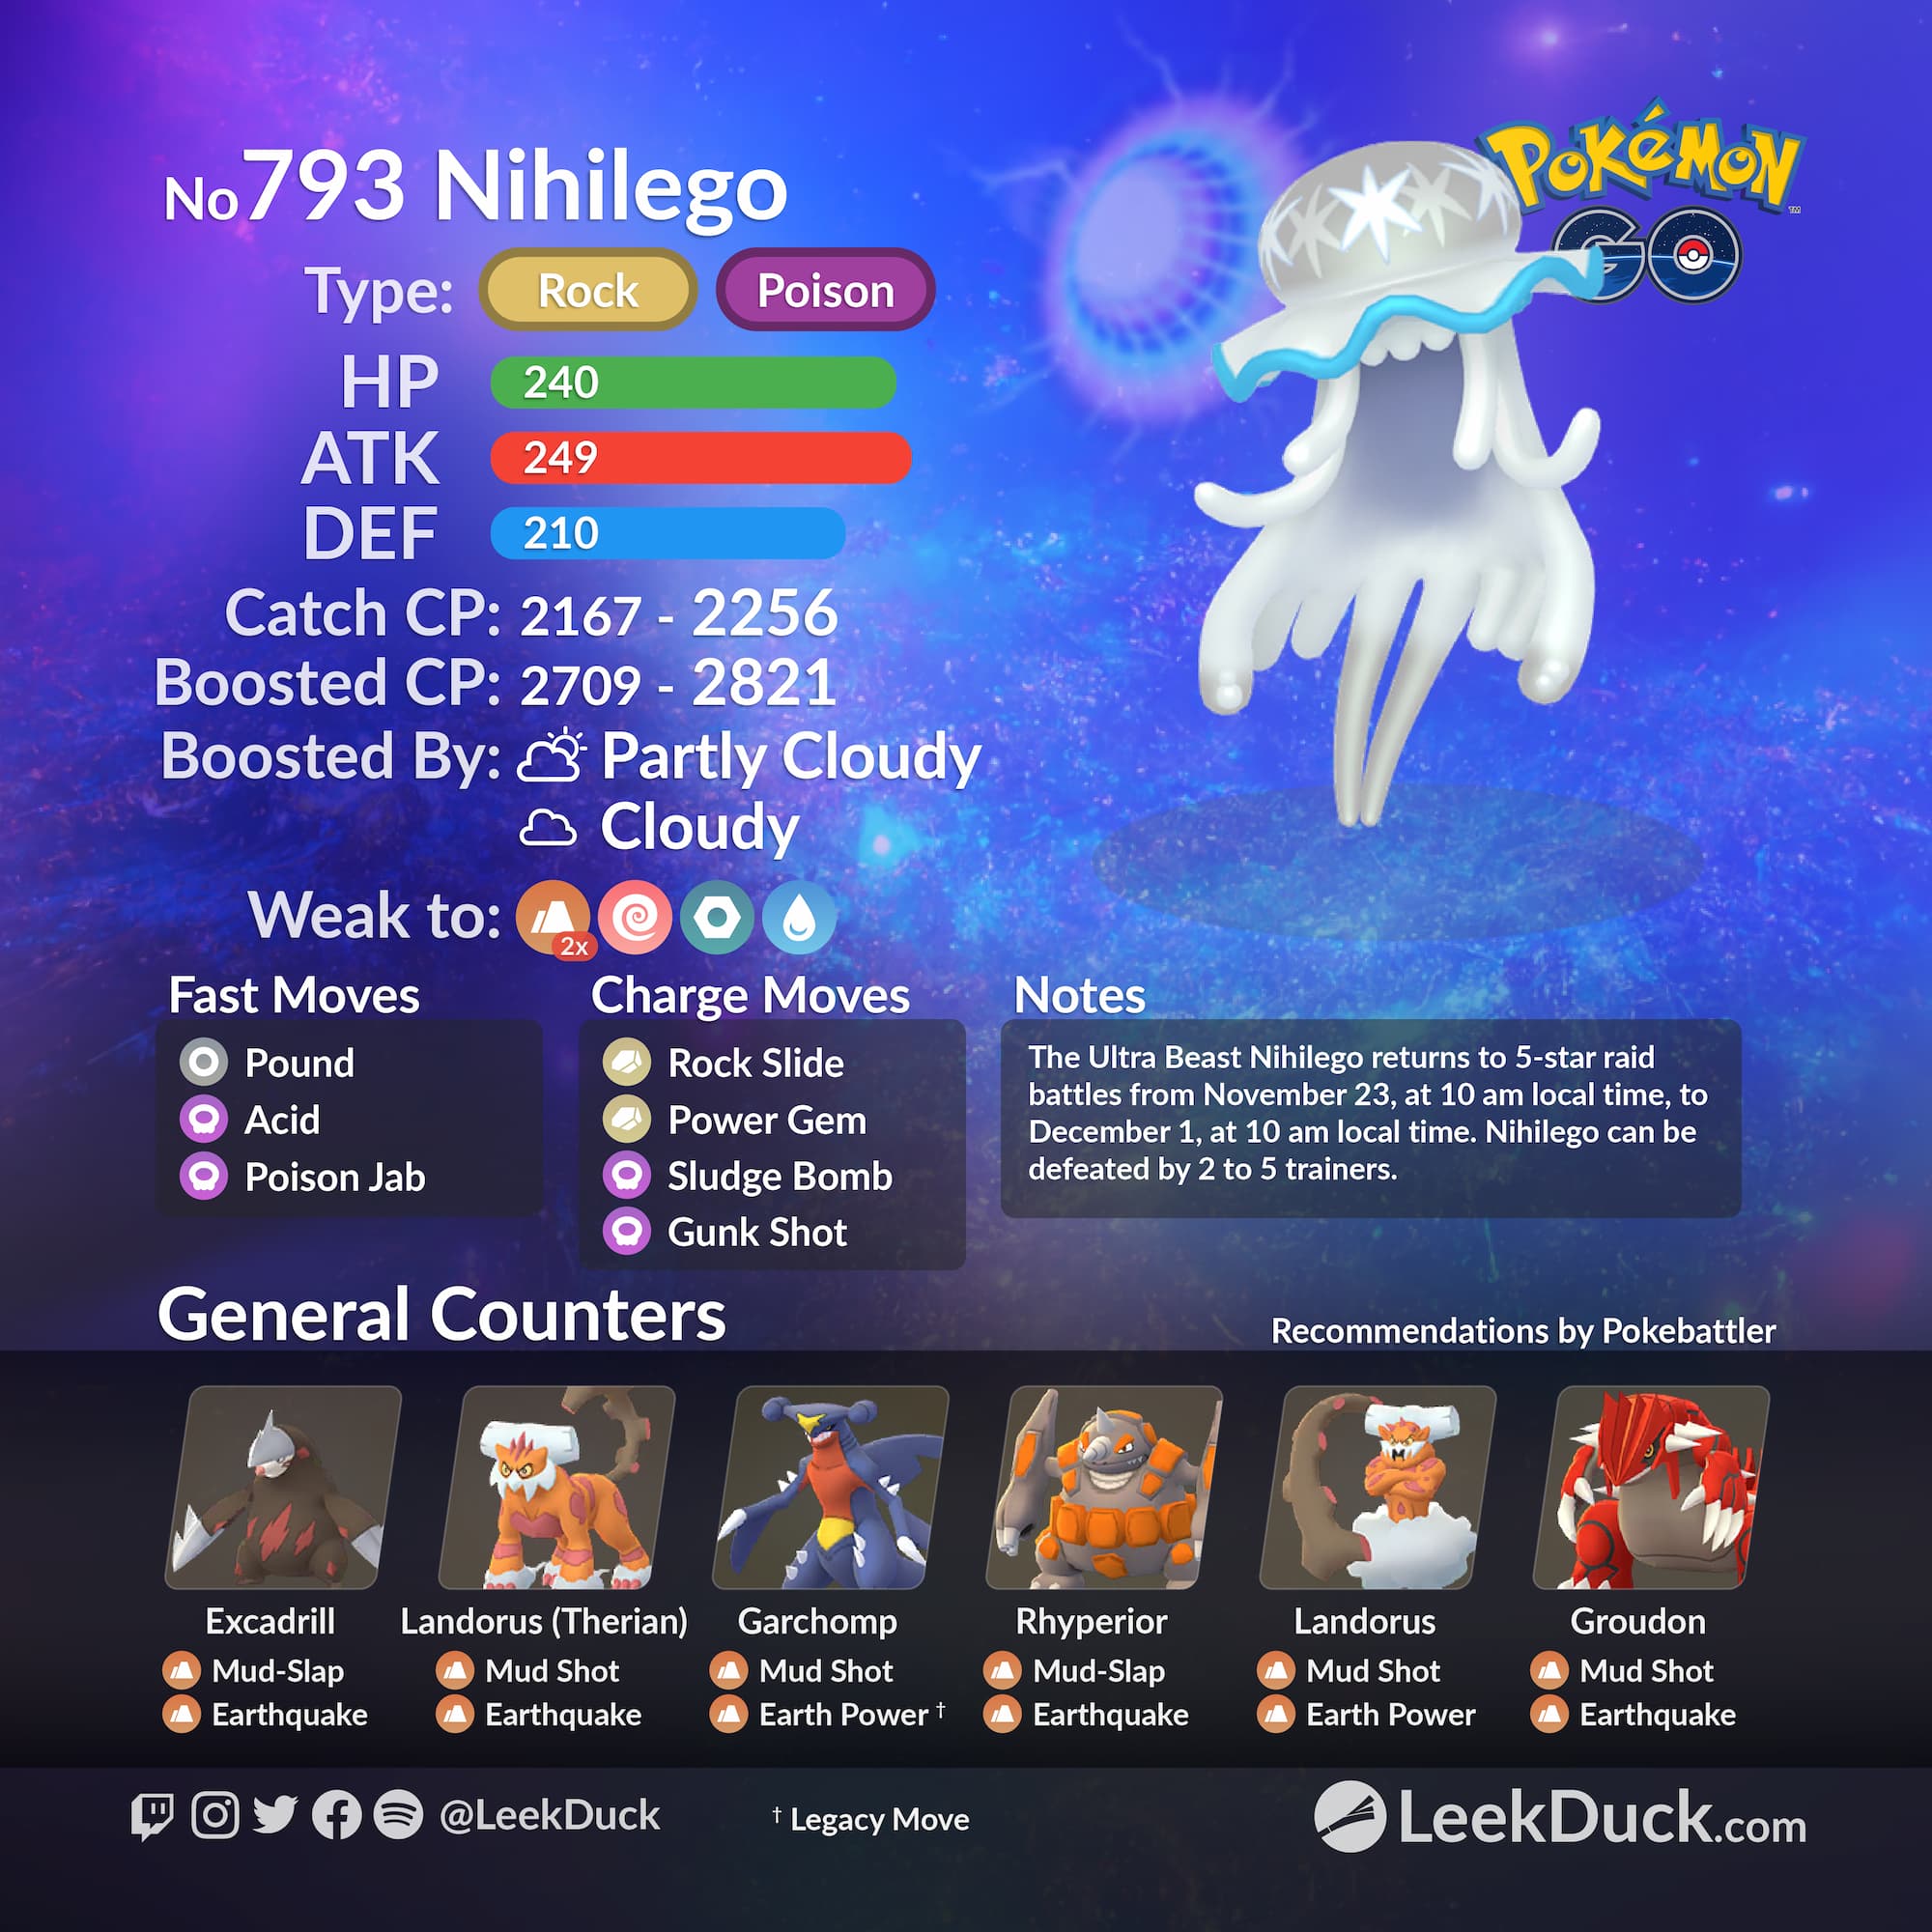 Pokemon Go Nihilego Raid Guide: Best Counters, Weaknesses, Raid Hours, And  More Tips - GameSpot